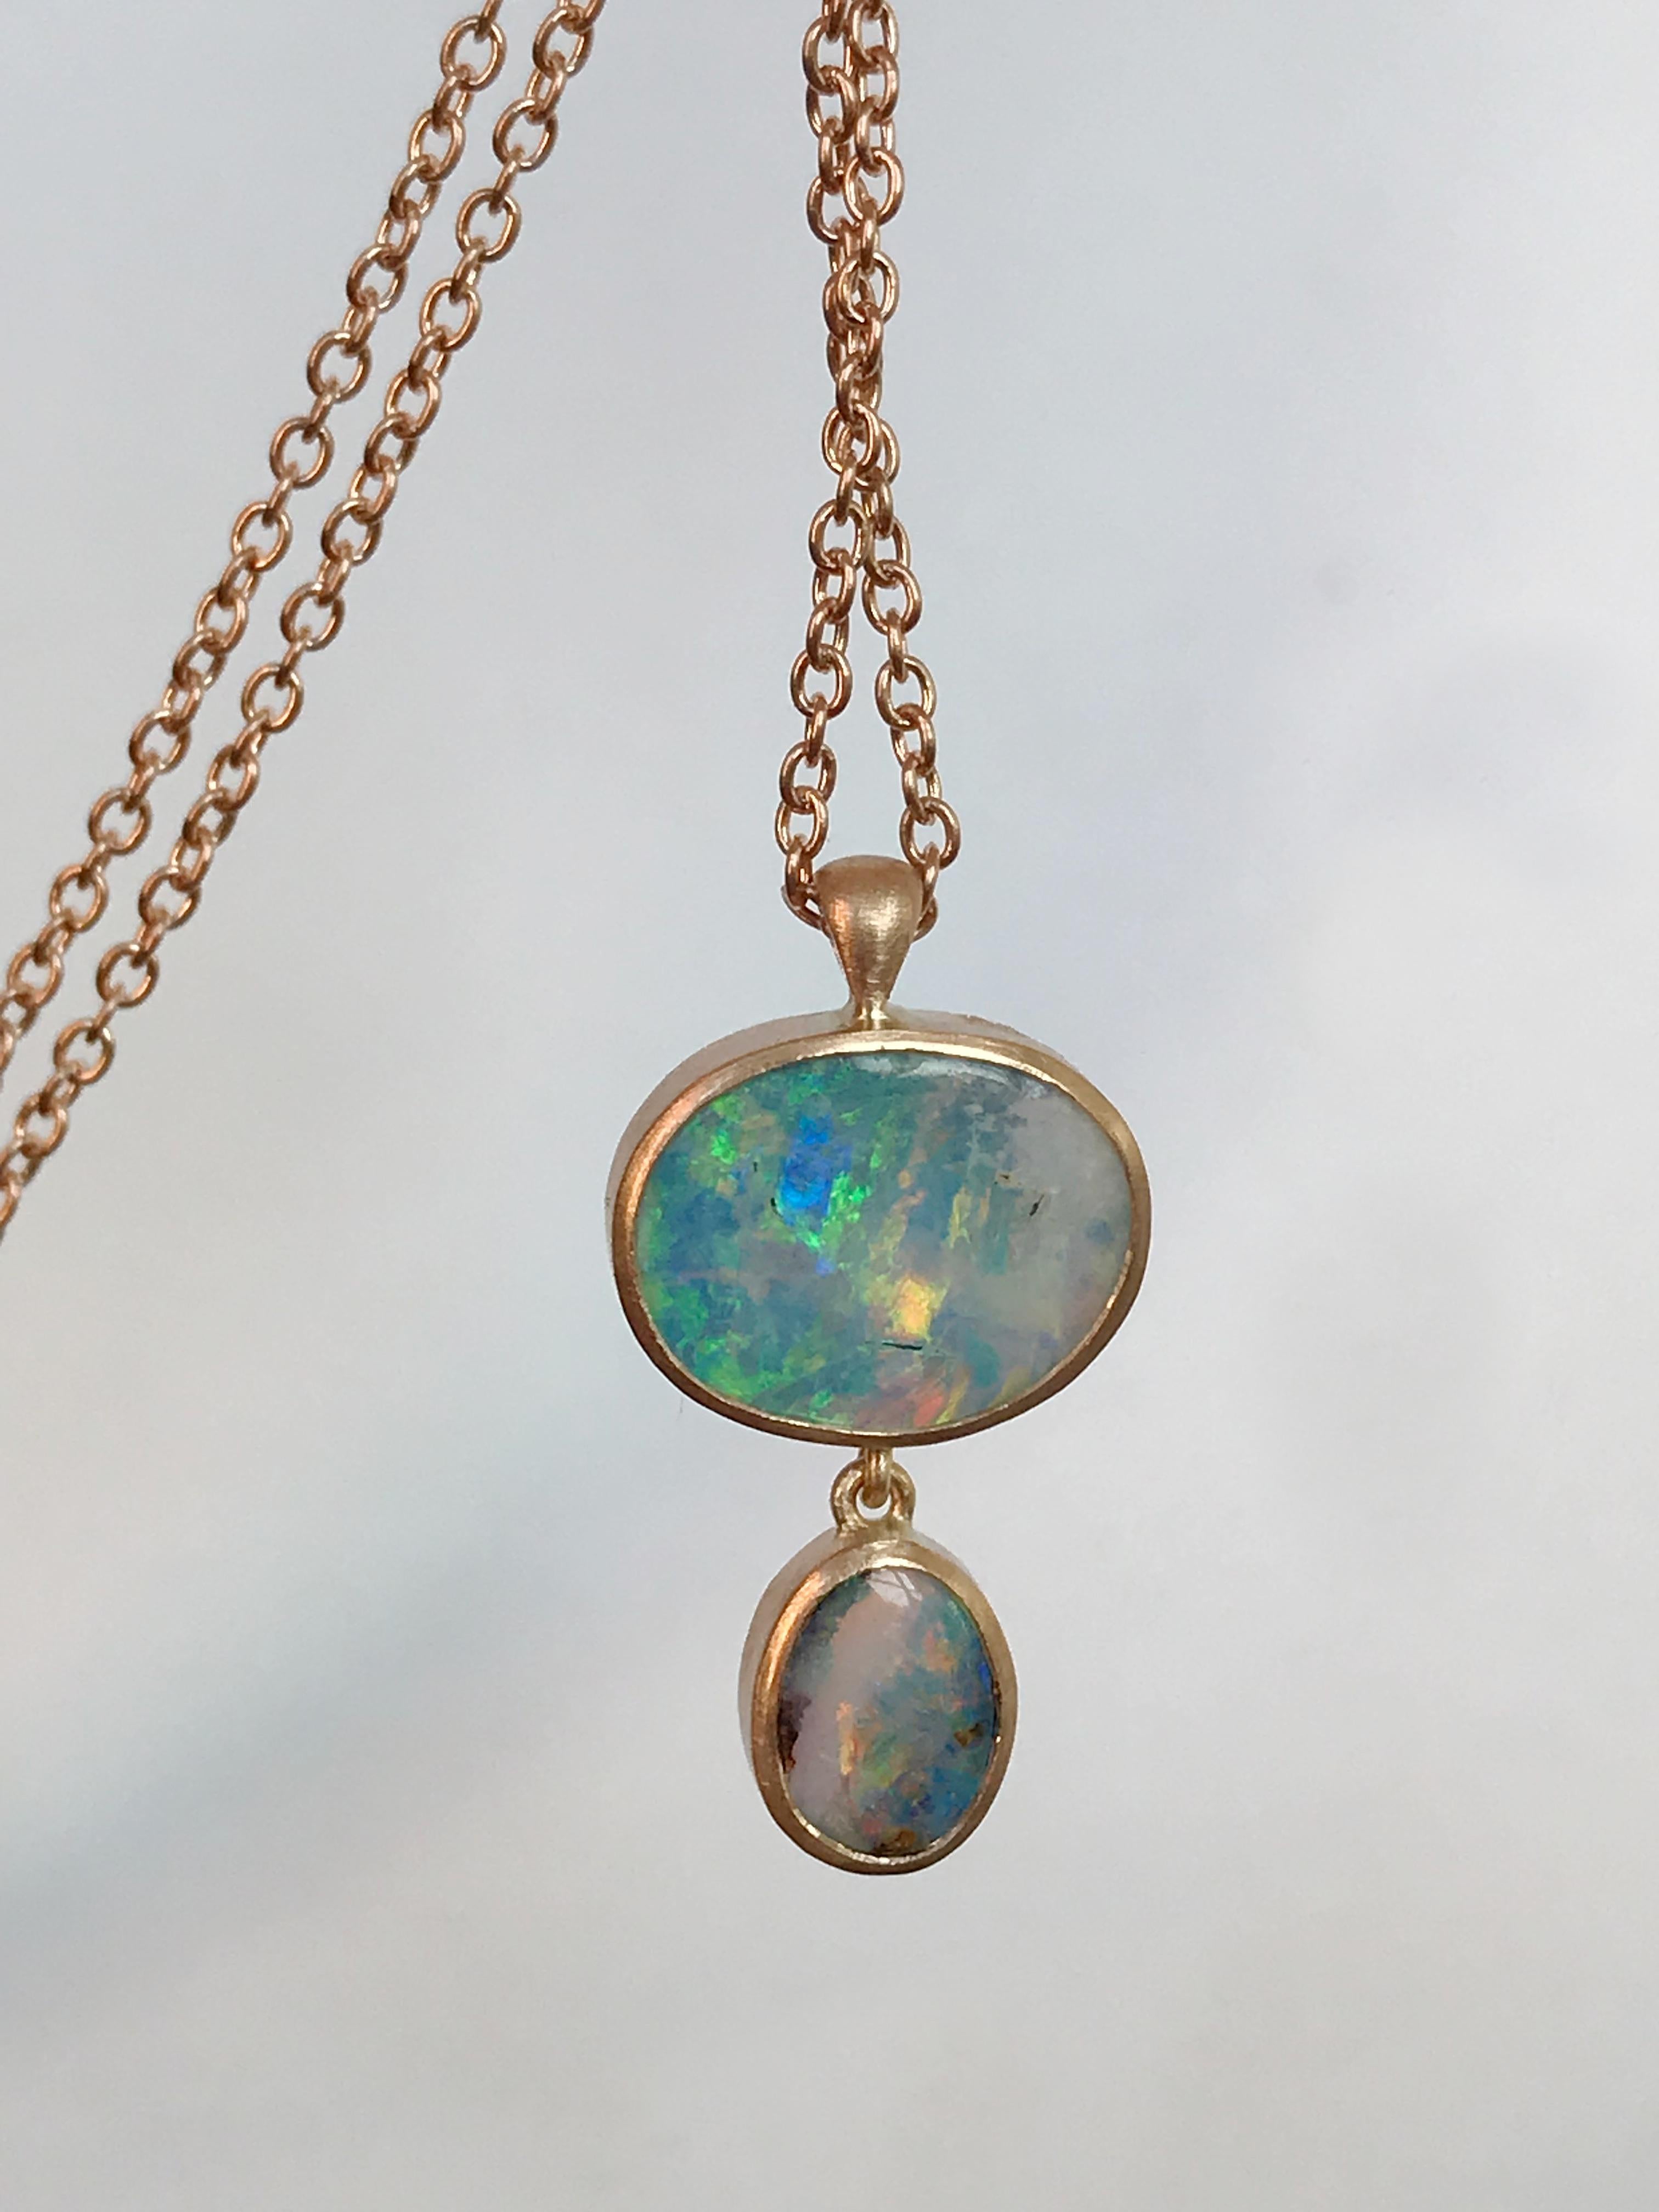 Dalben design One of a Kind 18k rose gold matte finishing necklace with two bezel-set green azure Australian Boulder Opals weight 2,65 carat. 
pendant dimension : 
width 11 mm 
height 18 mm 
Chain length 43 cm ( 16,9 inch ) resizable
The necklace